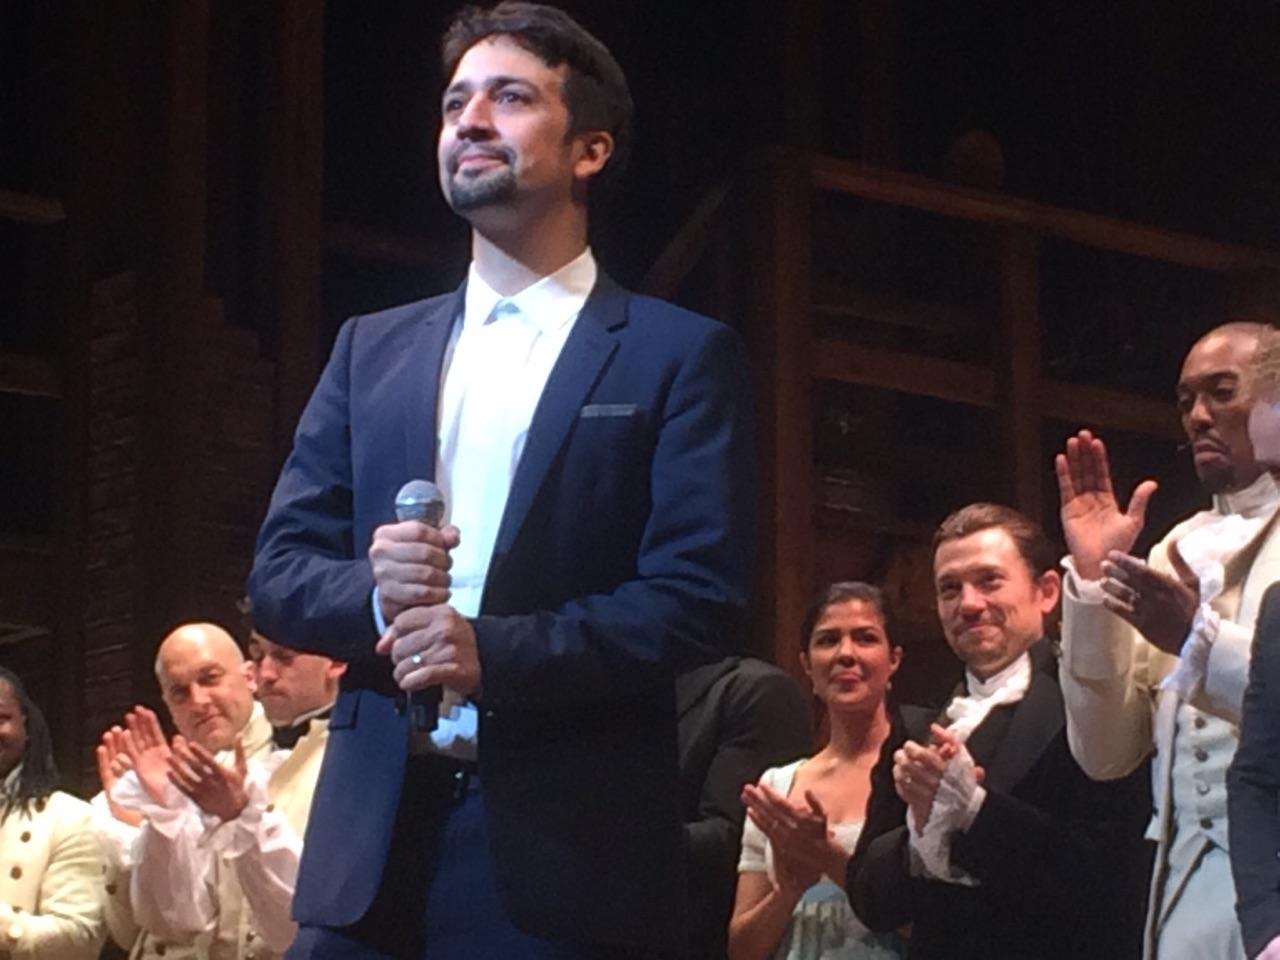 Lin-Manuel Miranda appears on stage at the opening night of “Hamilton” in Chicago on Oct. 19. Actor Miguel Cervantes appears in the background, at right, in black. (Marc Vitali / Chicago Tonight)